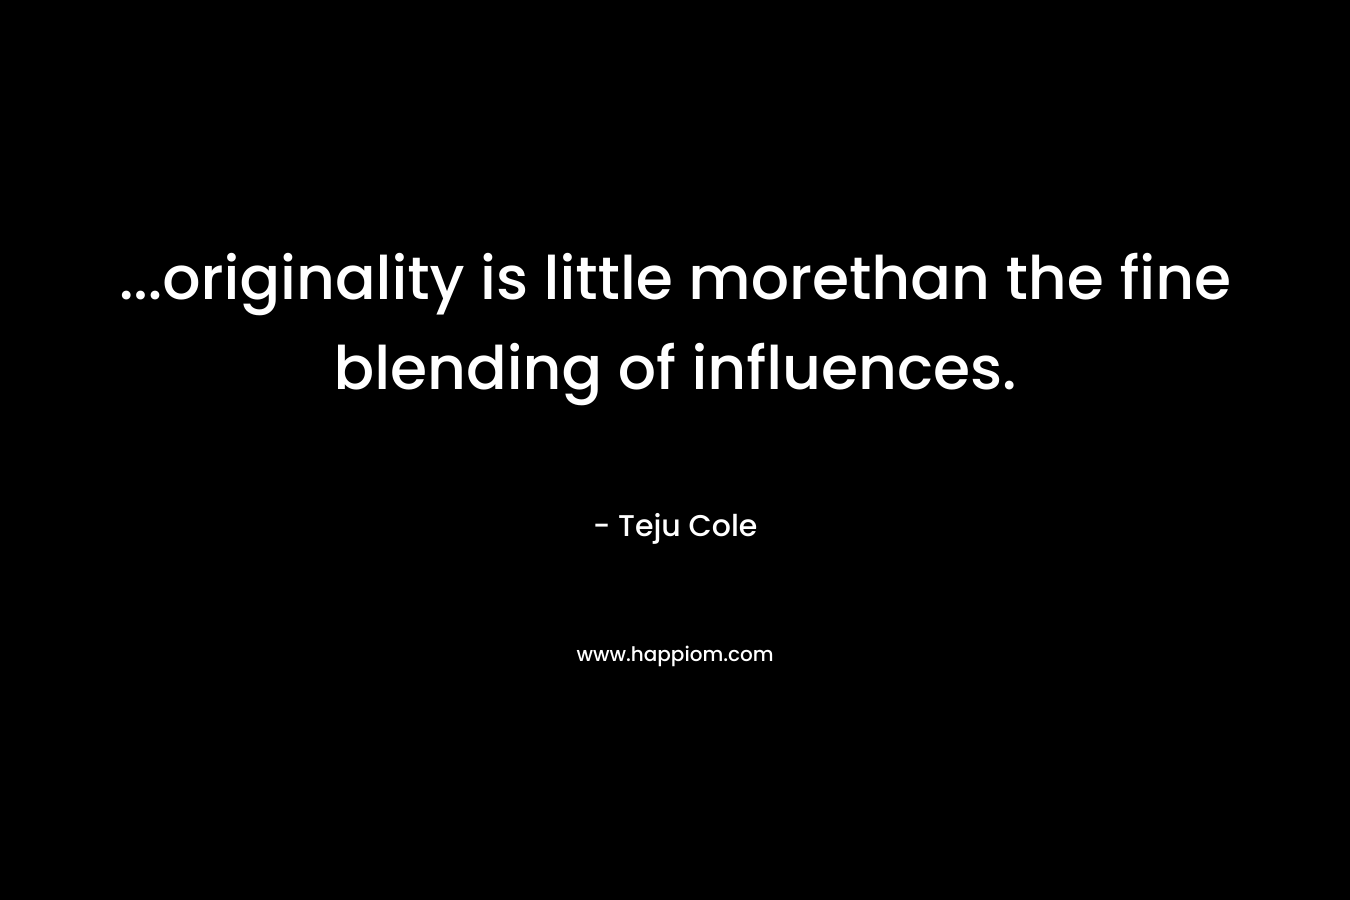 …originality is little morethan the fine blending of influences. – Teju Cole